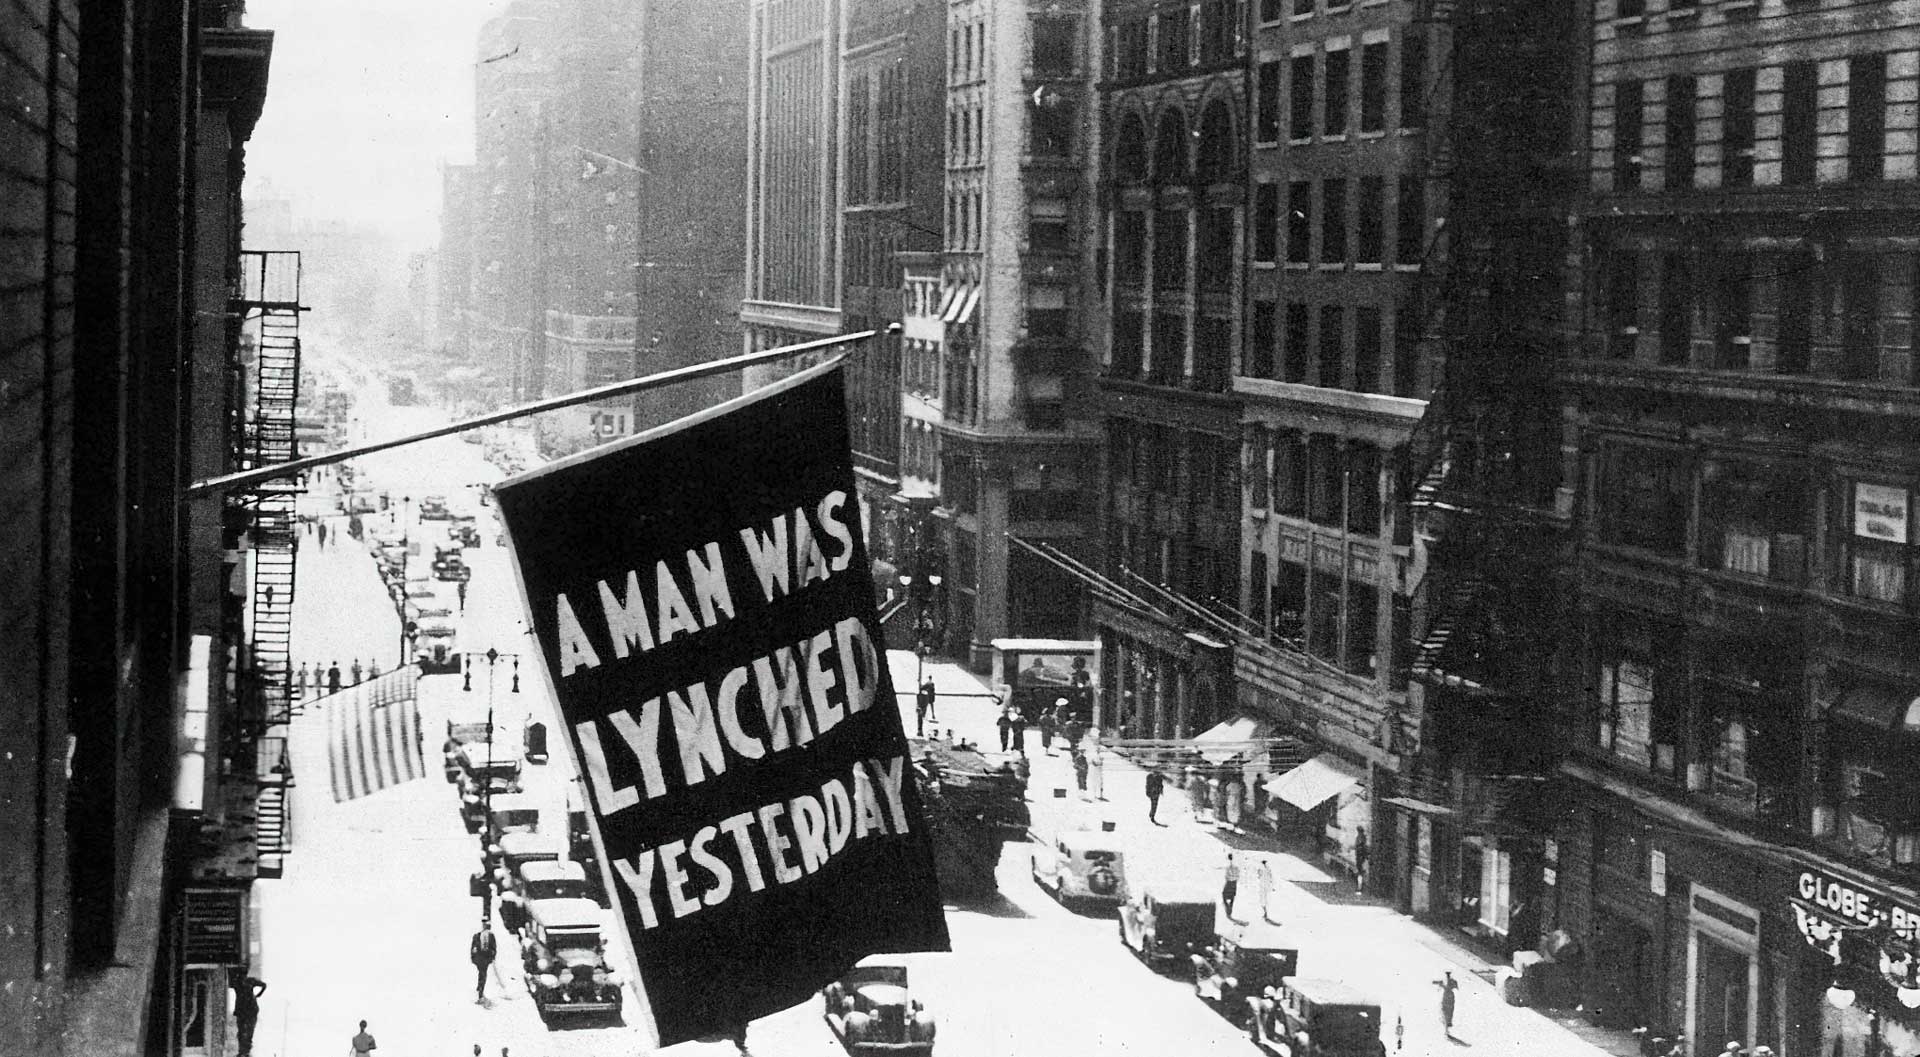 1936: A flag hanging outside the headquarters of the NAACP (National Association for the Advancement of Coloured People) at 69 Fifth Avenue, New York City, bearing the words “A Man was Lynched Yesterday.” (Photo by MPI/Getty Images)